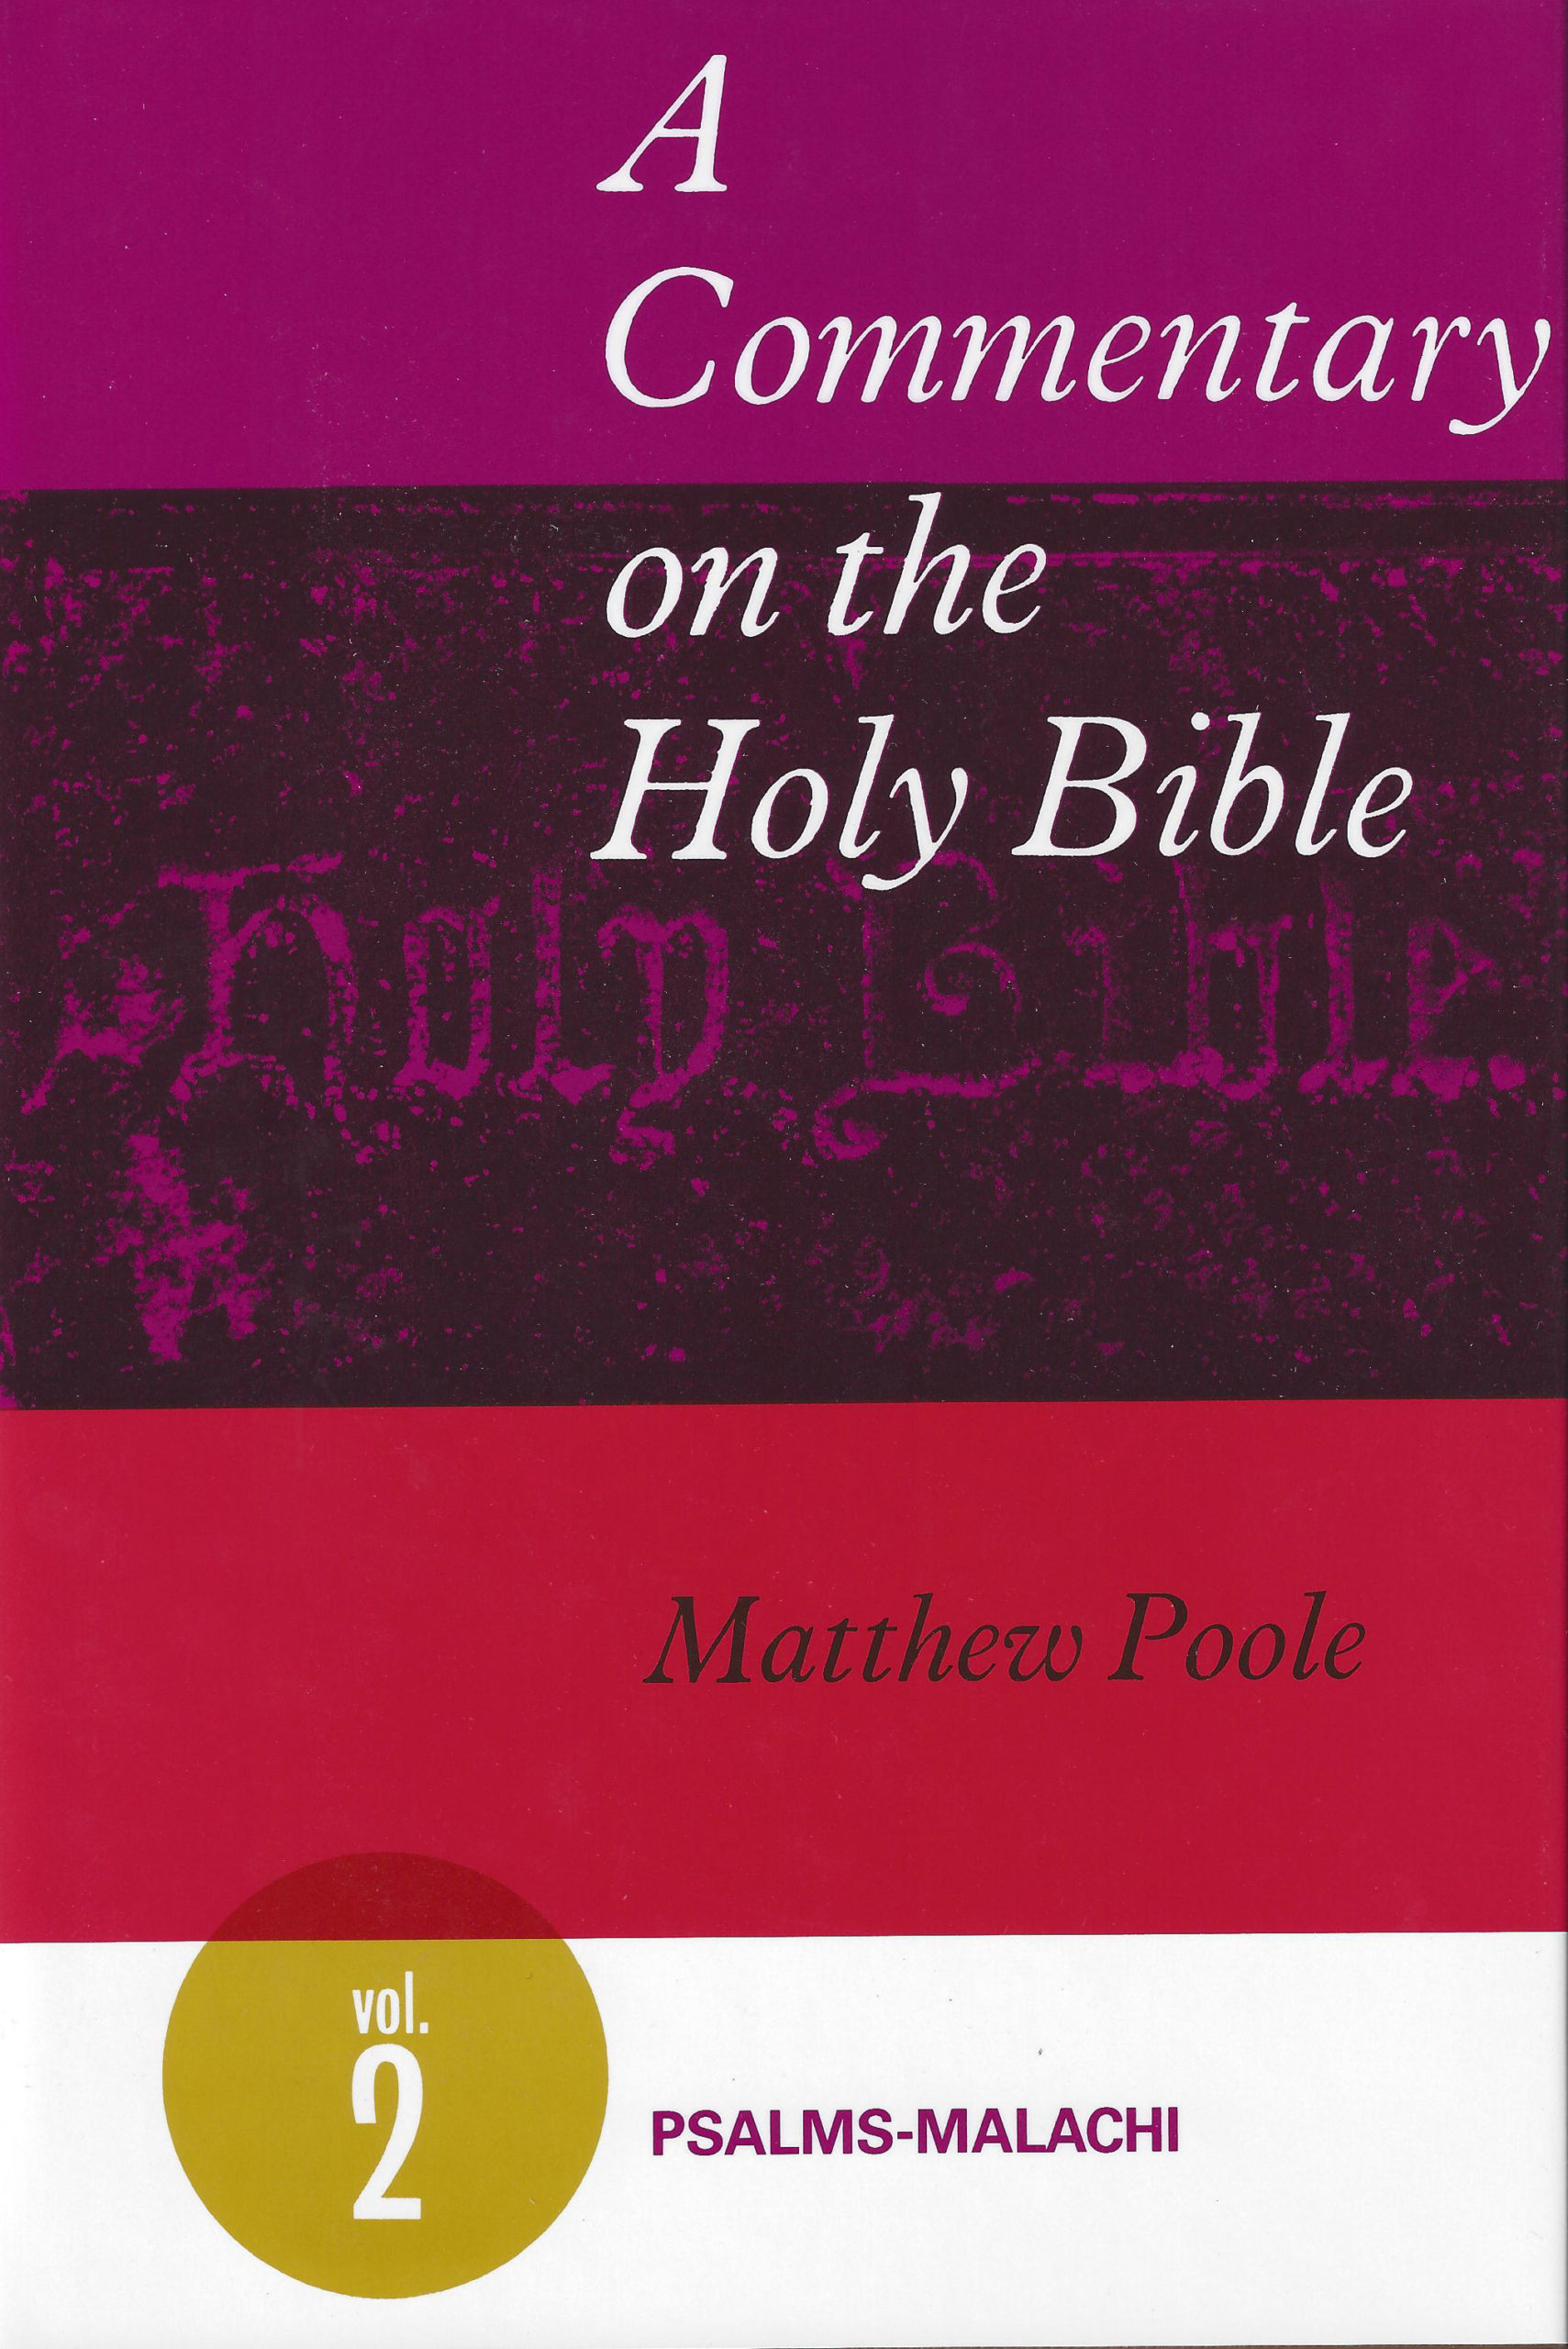 A Commentary on the Holy Bible